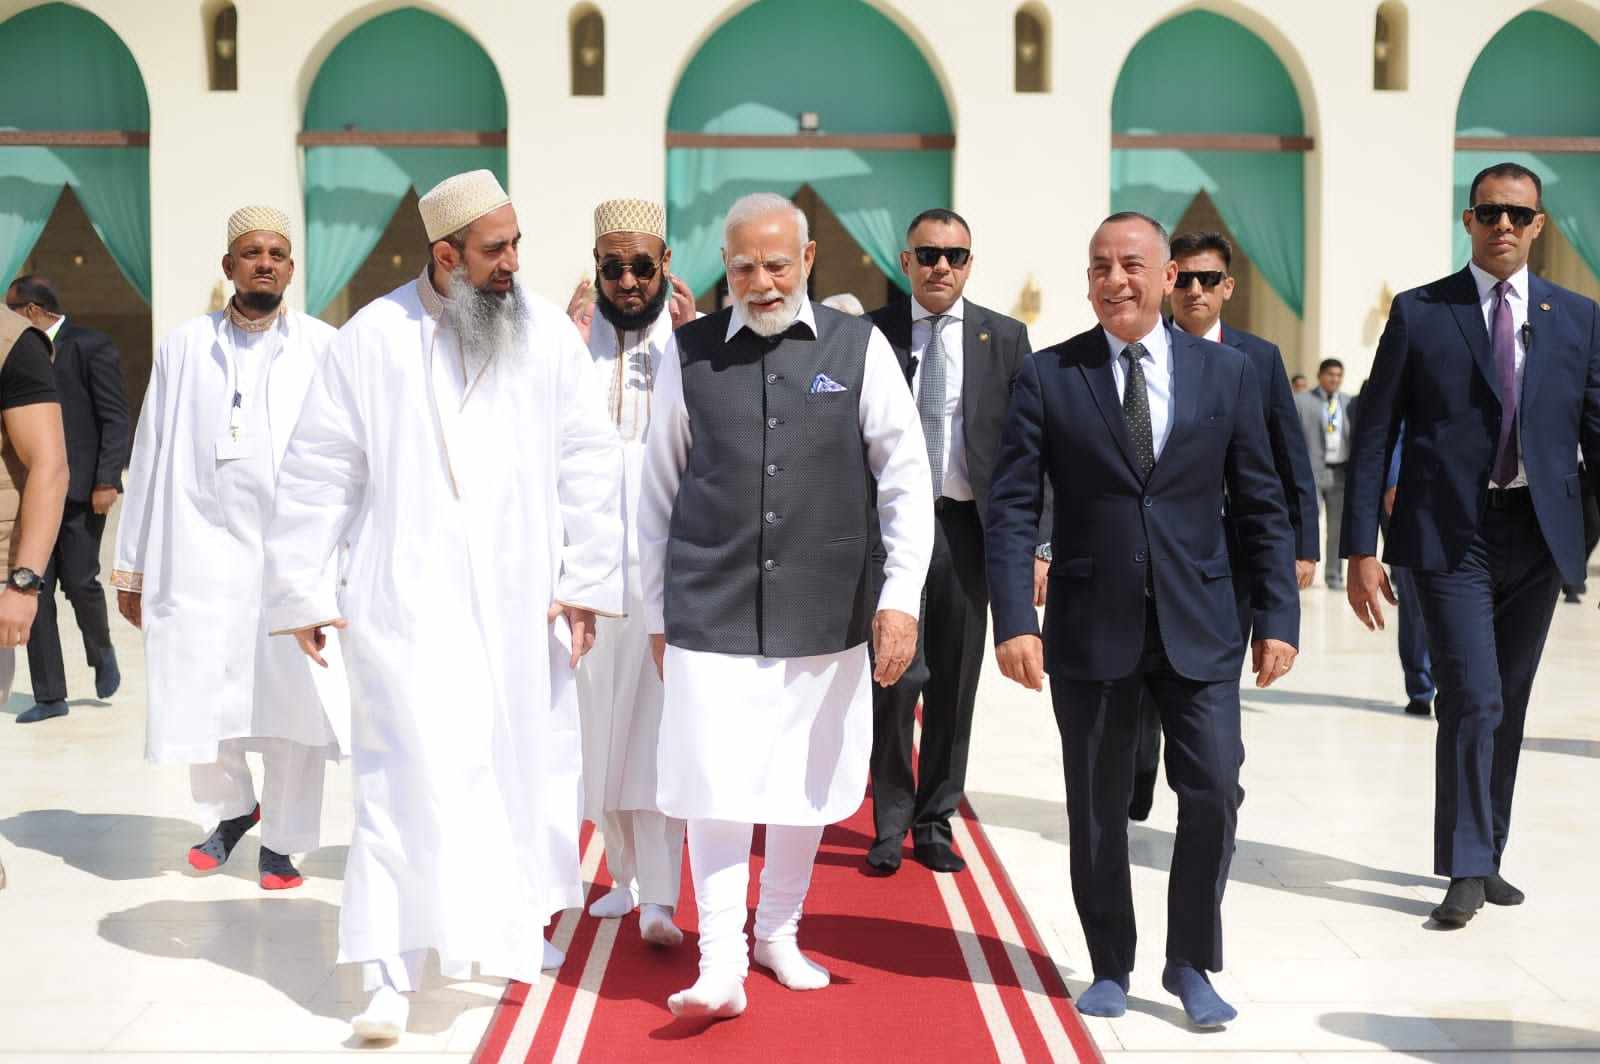 The Prime Minister of India visits Al-Hakim Bi-Amr Allah Mosque in historic Cairo